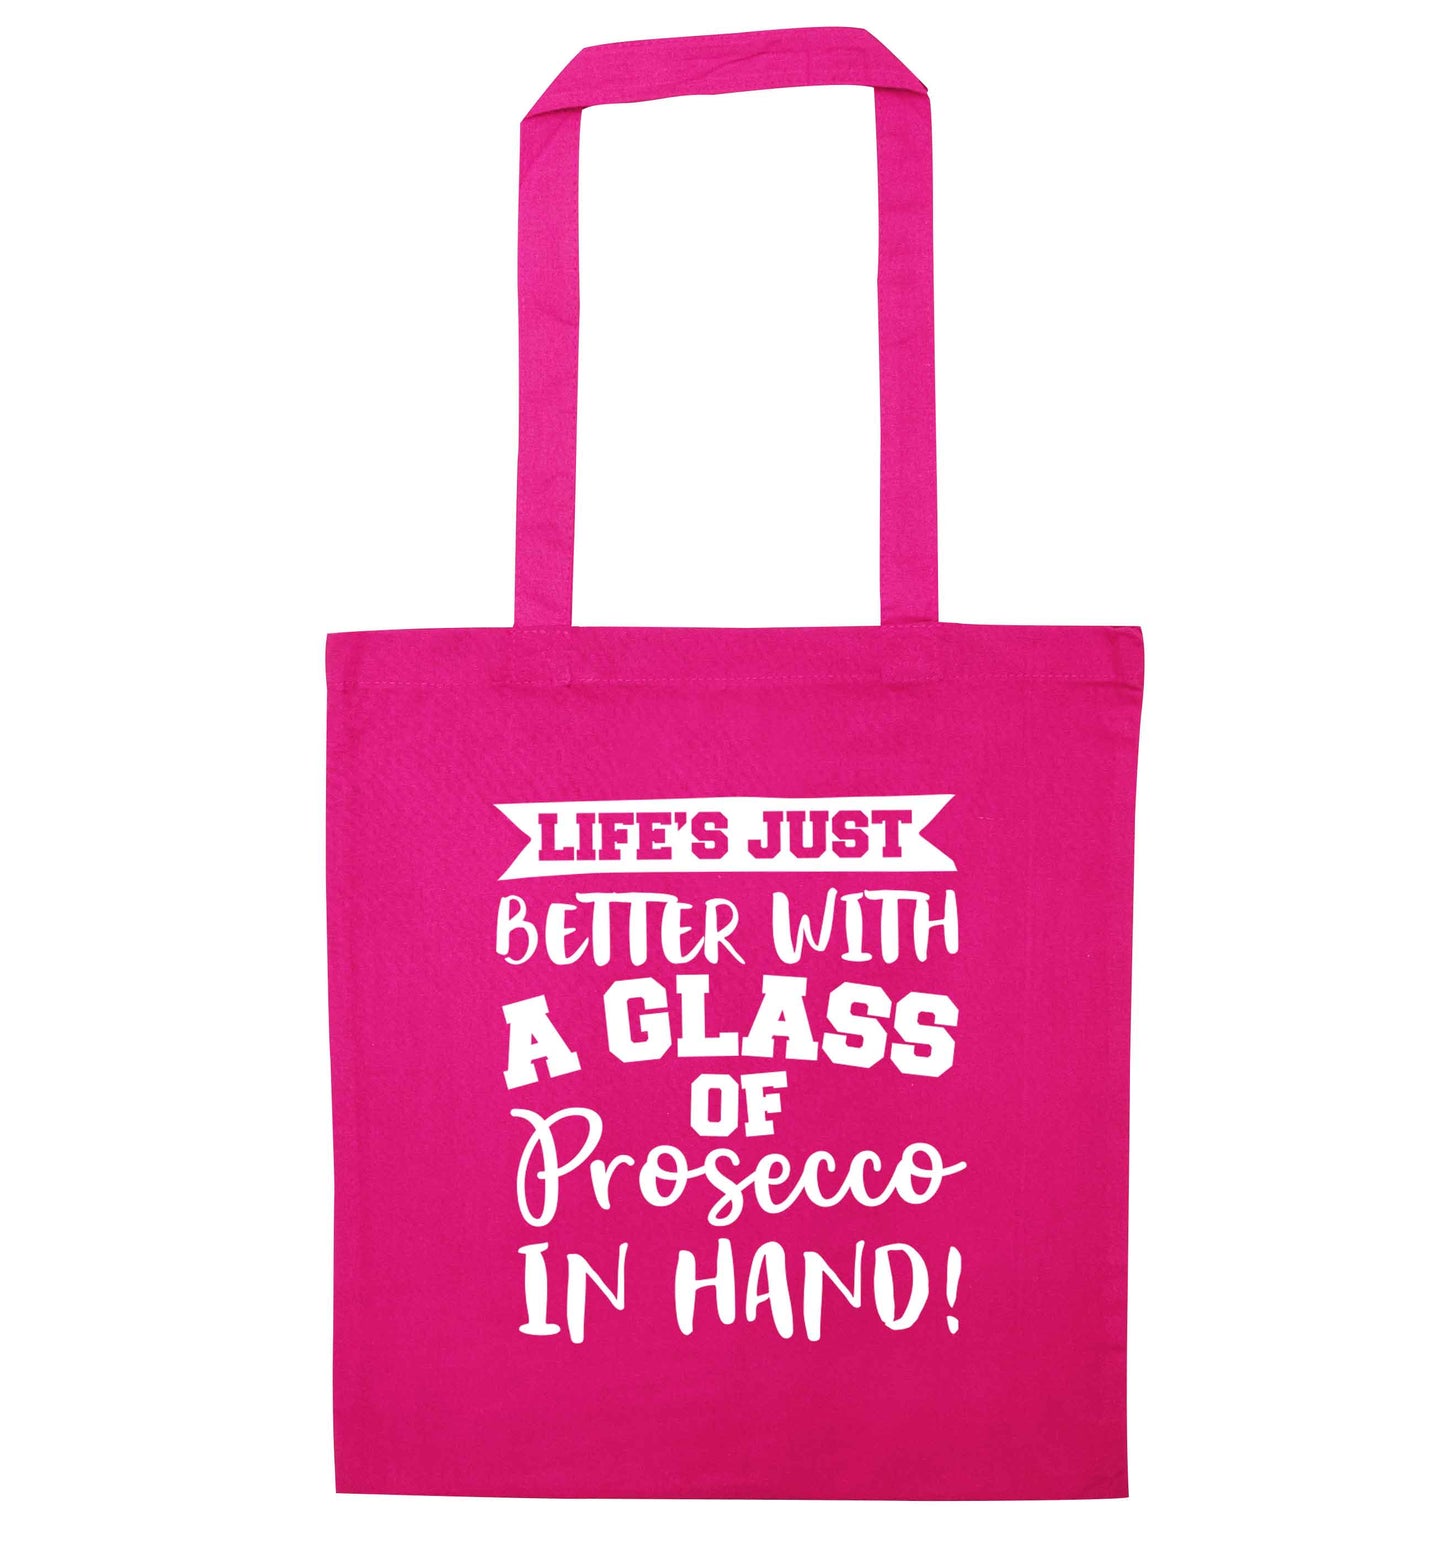 Life's just better with a glass of prosecco in hand pink tote bag